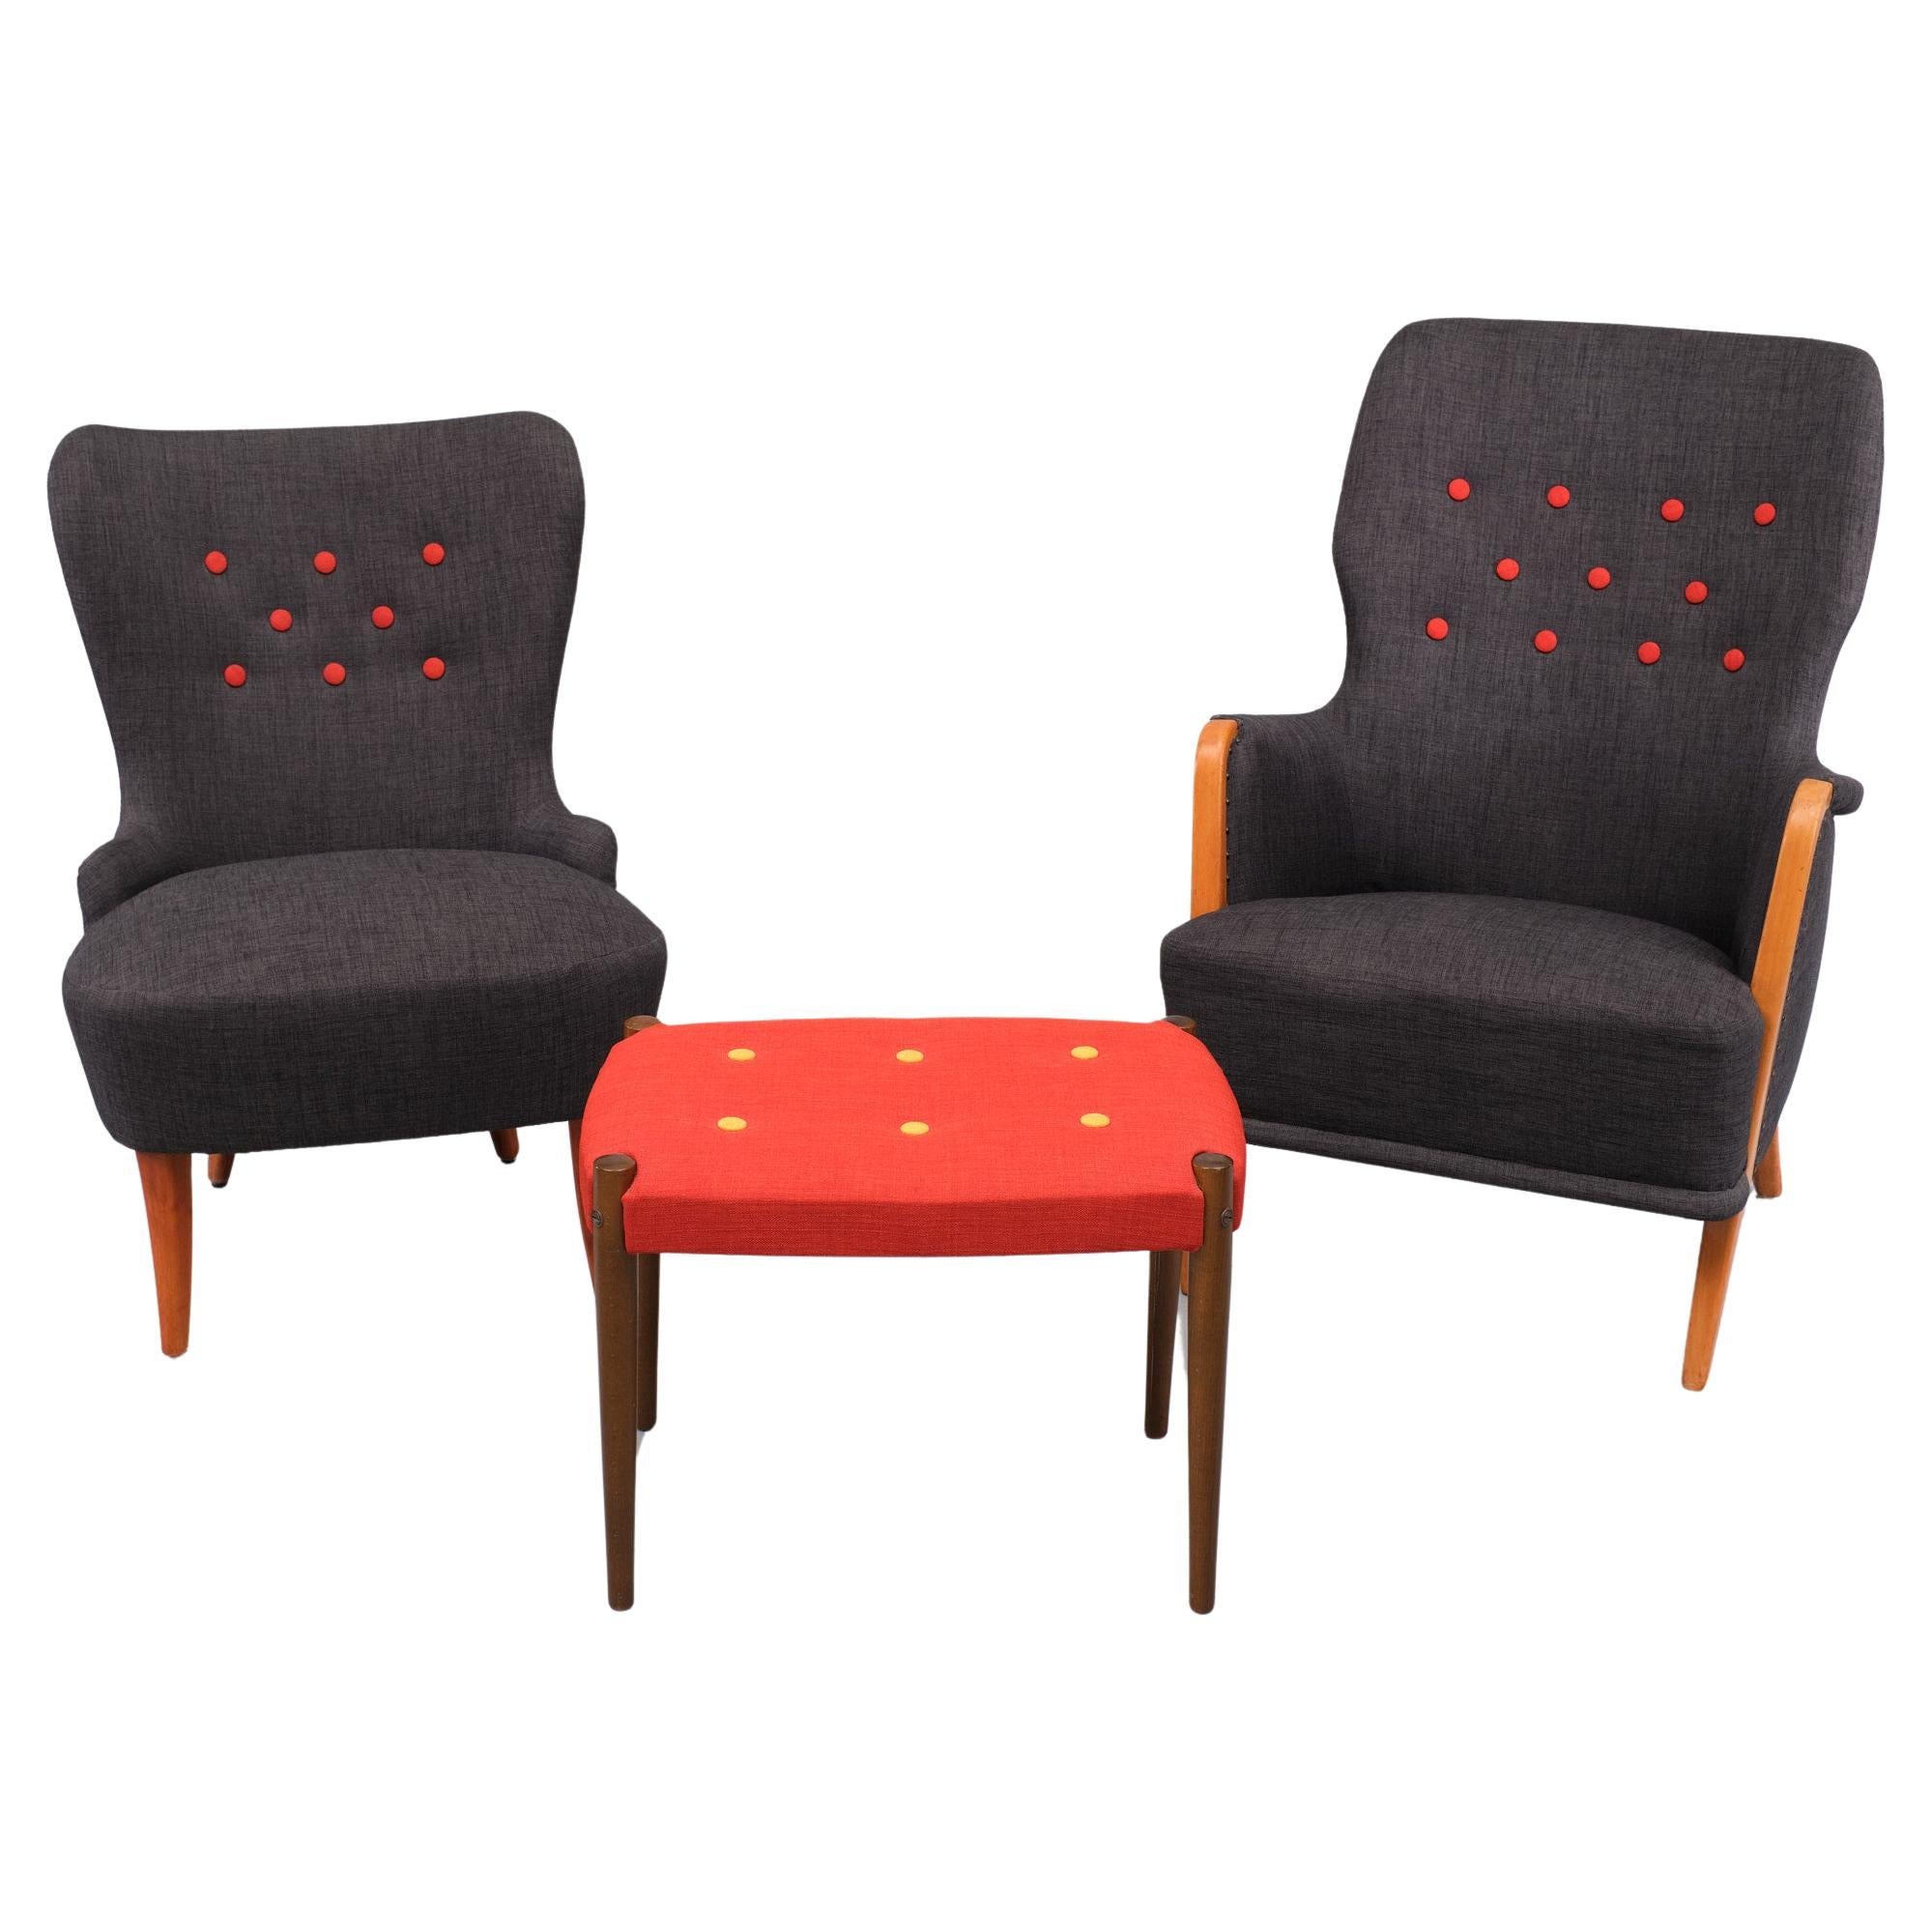 For Him and Her  Easy chairs and matching ottoman . 1950s   (Moderne der Mitte des Jahrhunderts) im Angebot